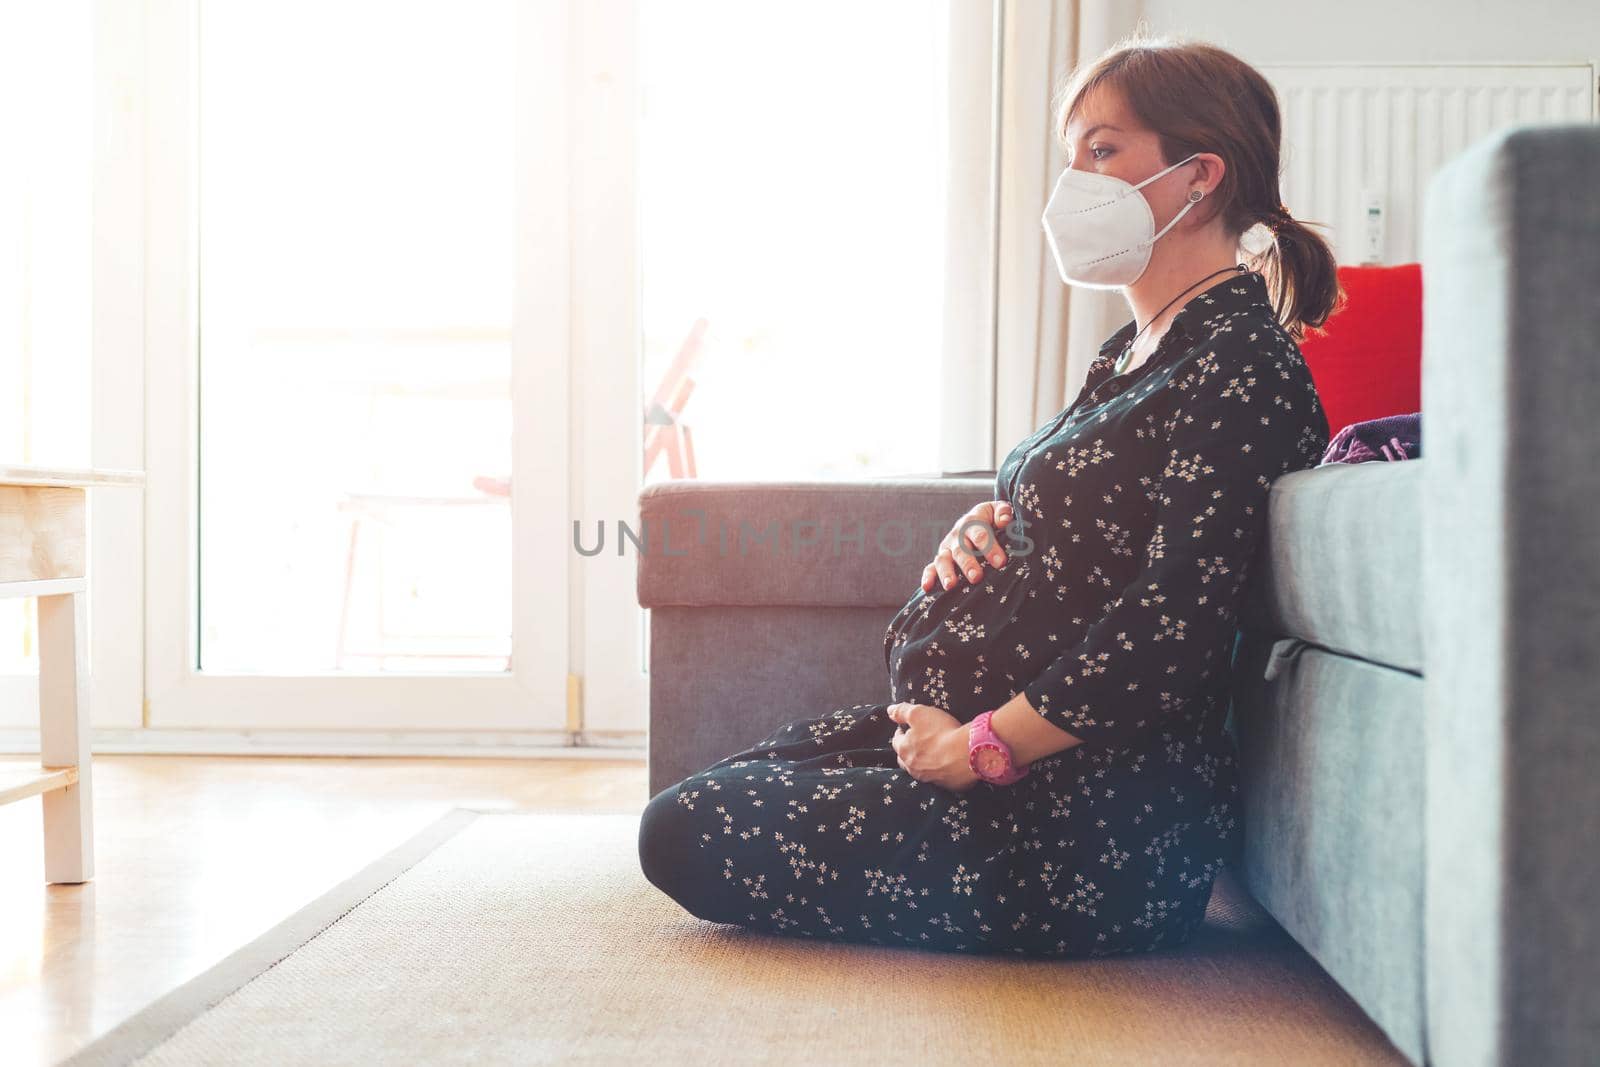 Quarantine at home. Pregnant woman with ffp2 face mask is sitting on the floor in the living room by Daxenbichler